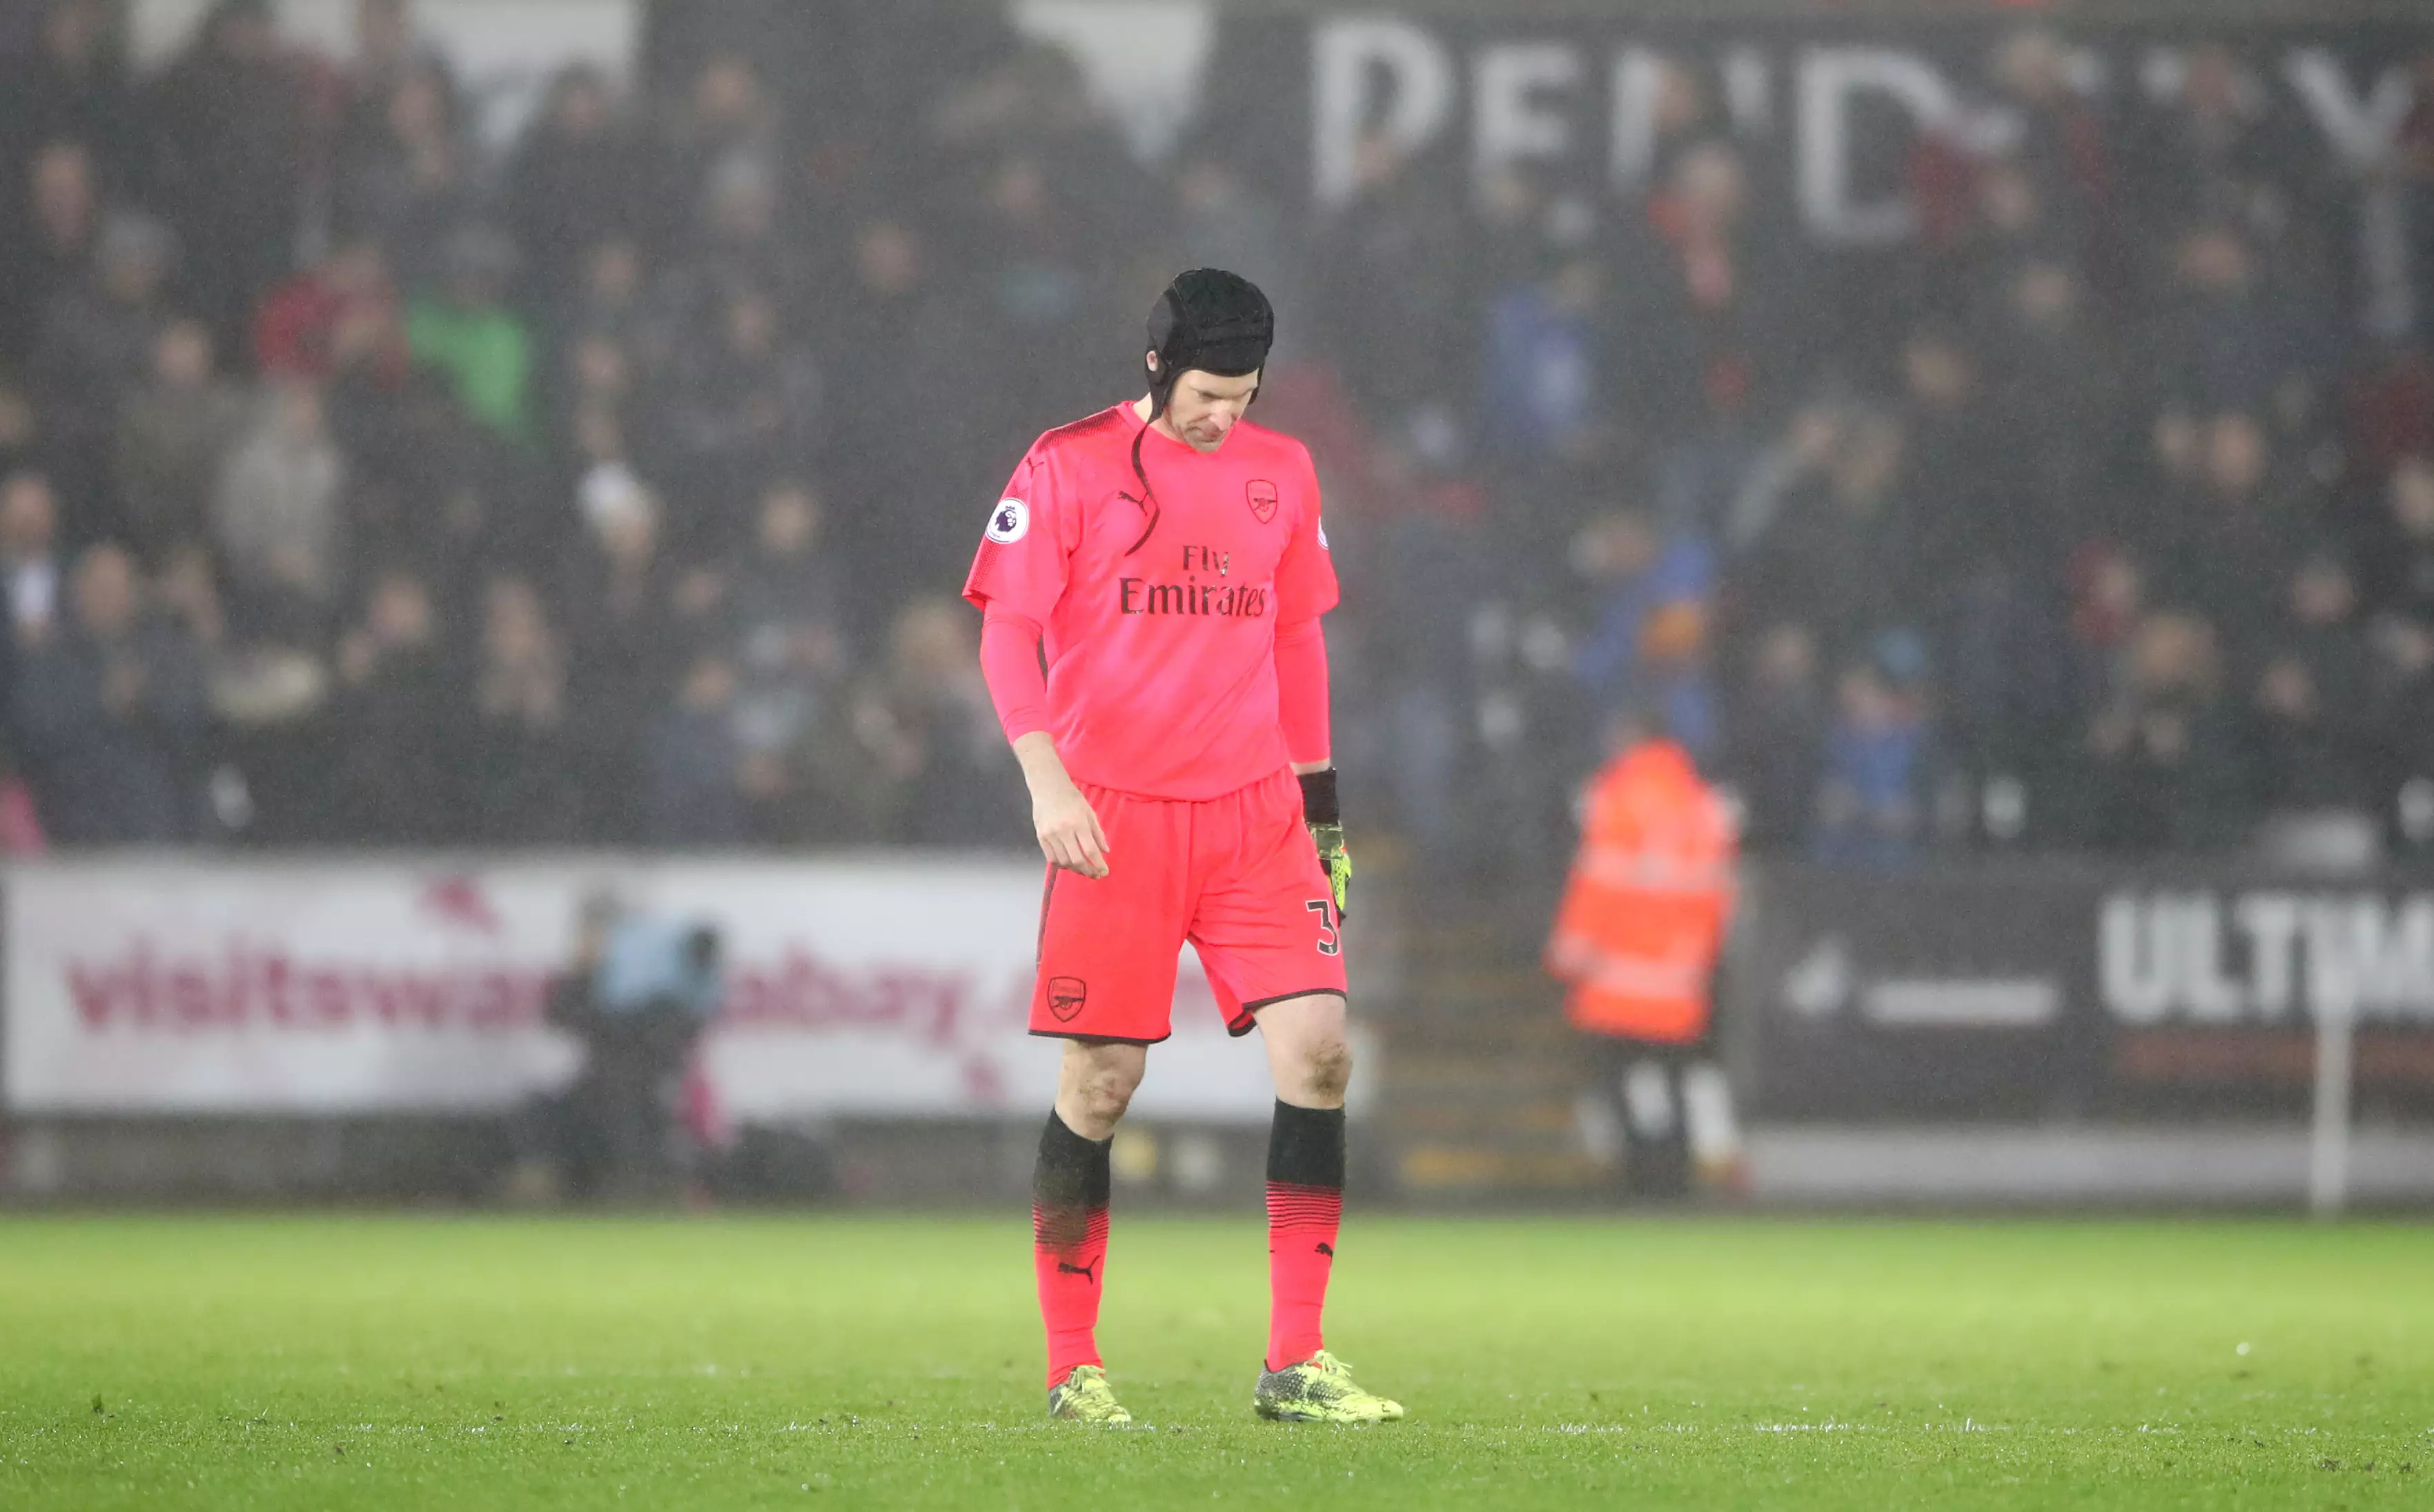 It wasn't a good season for Cech. Image: PA Images